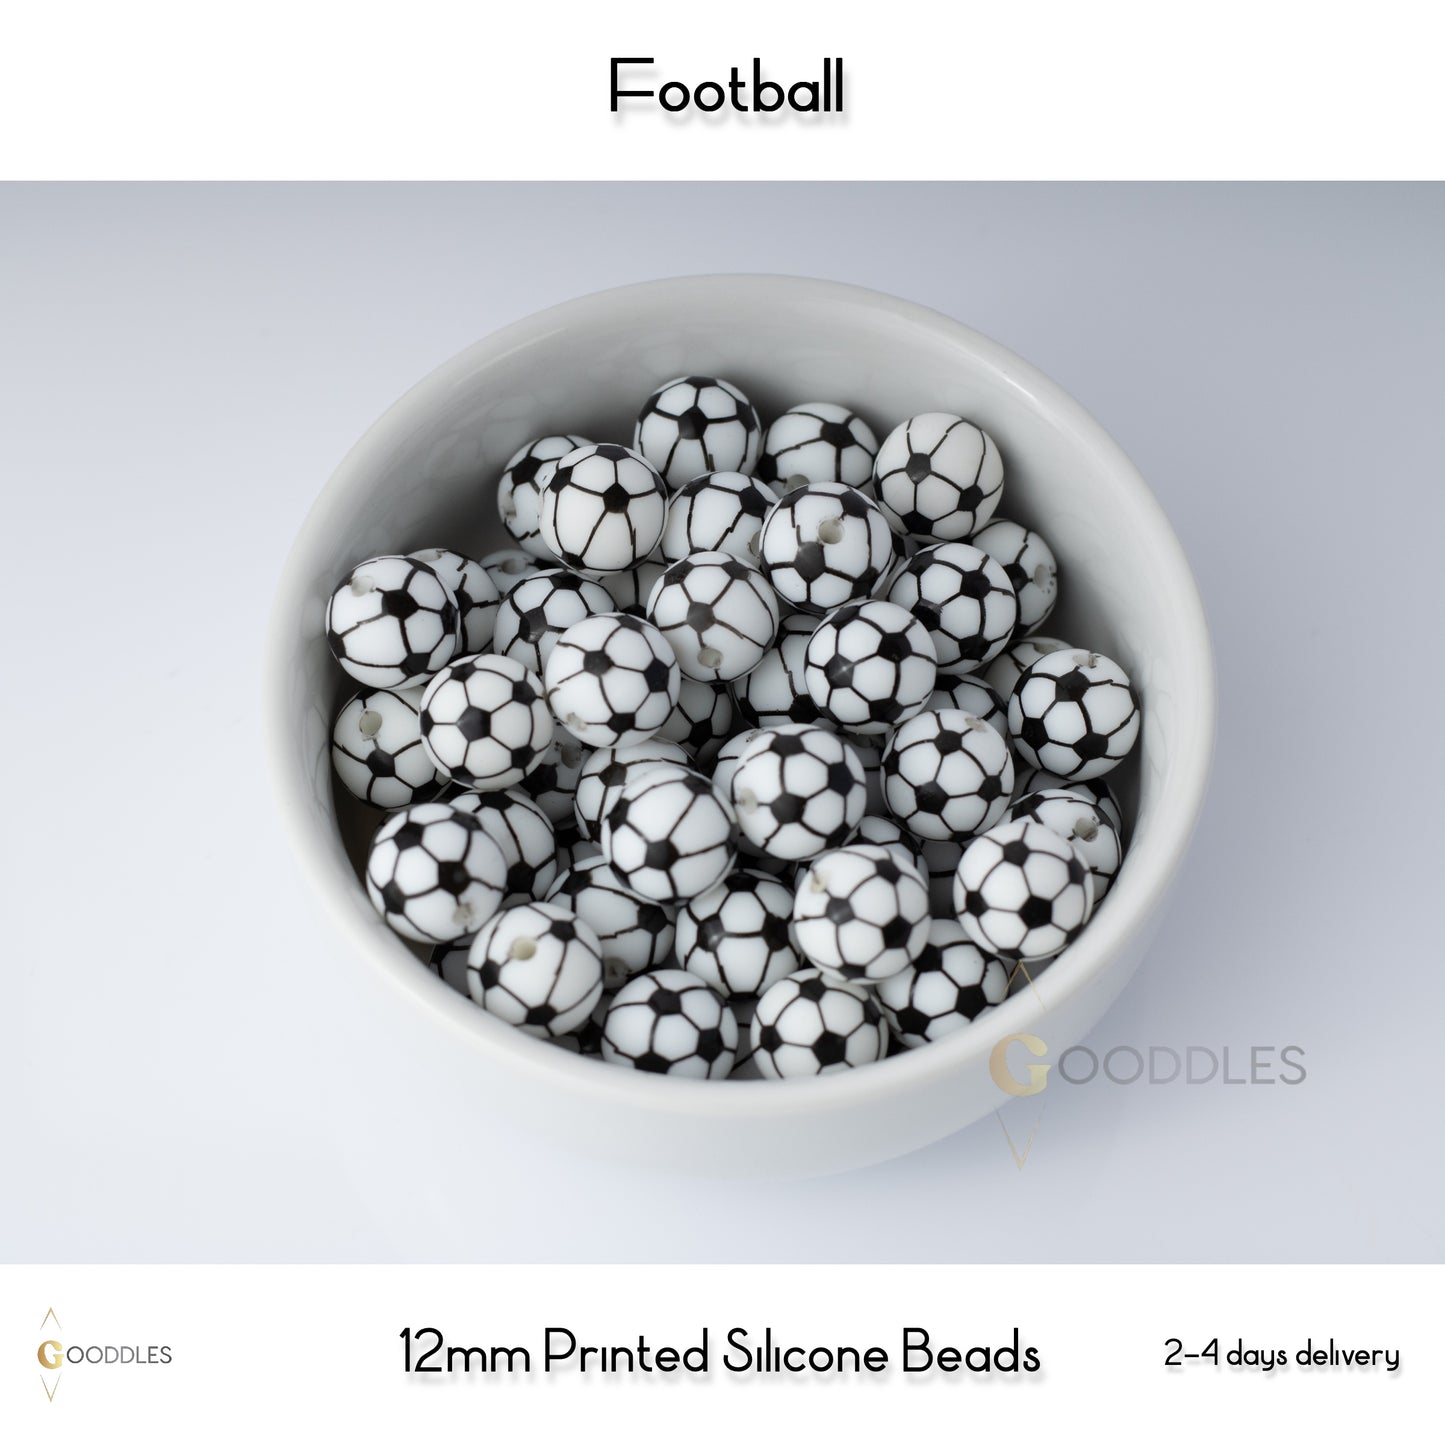 5pcs, Football Silicone Beads Printed Round Silicone Beads